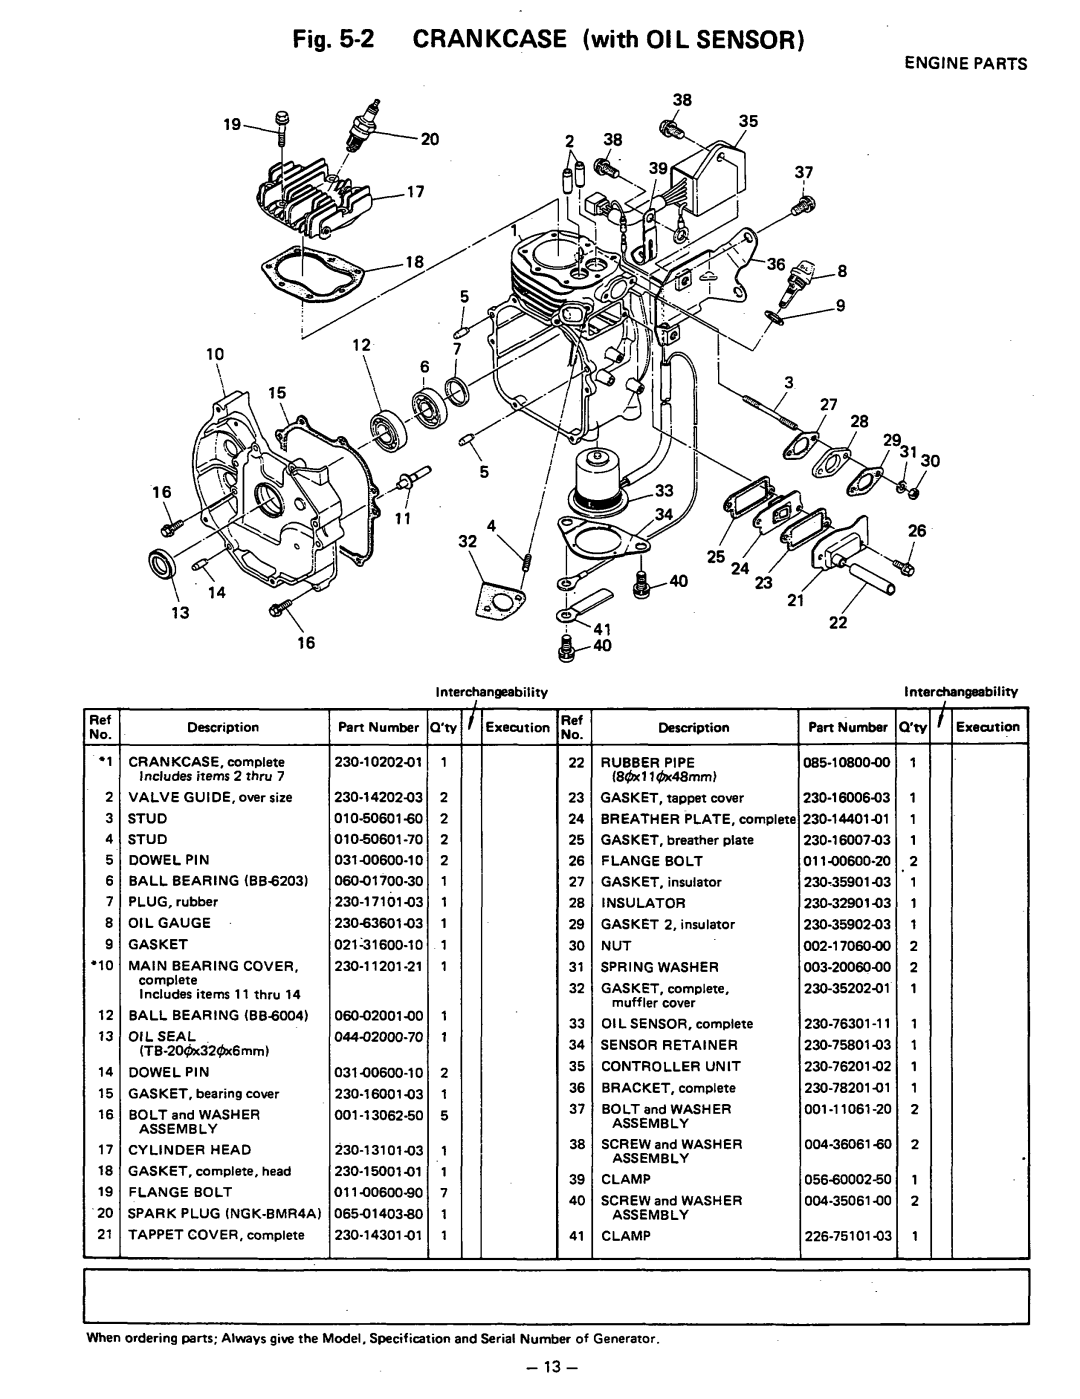 Subaru Robin Power Products R650 manual 2CRANKCASE with 01 L SENSOR, Engine Parts, Part Number, 085-1080000 